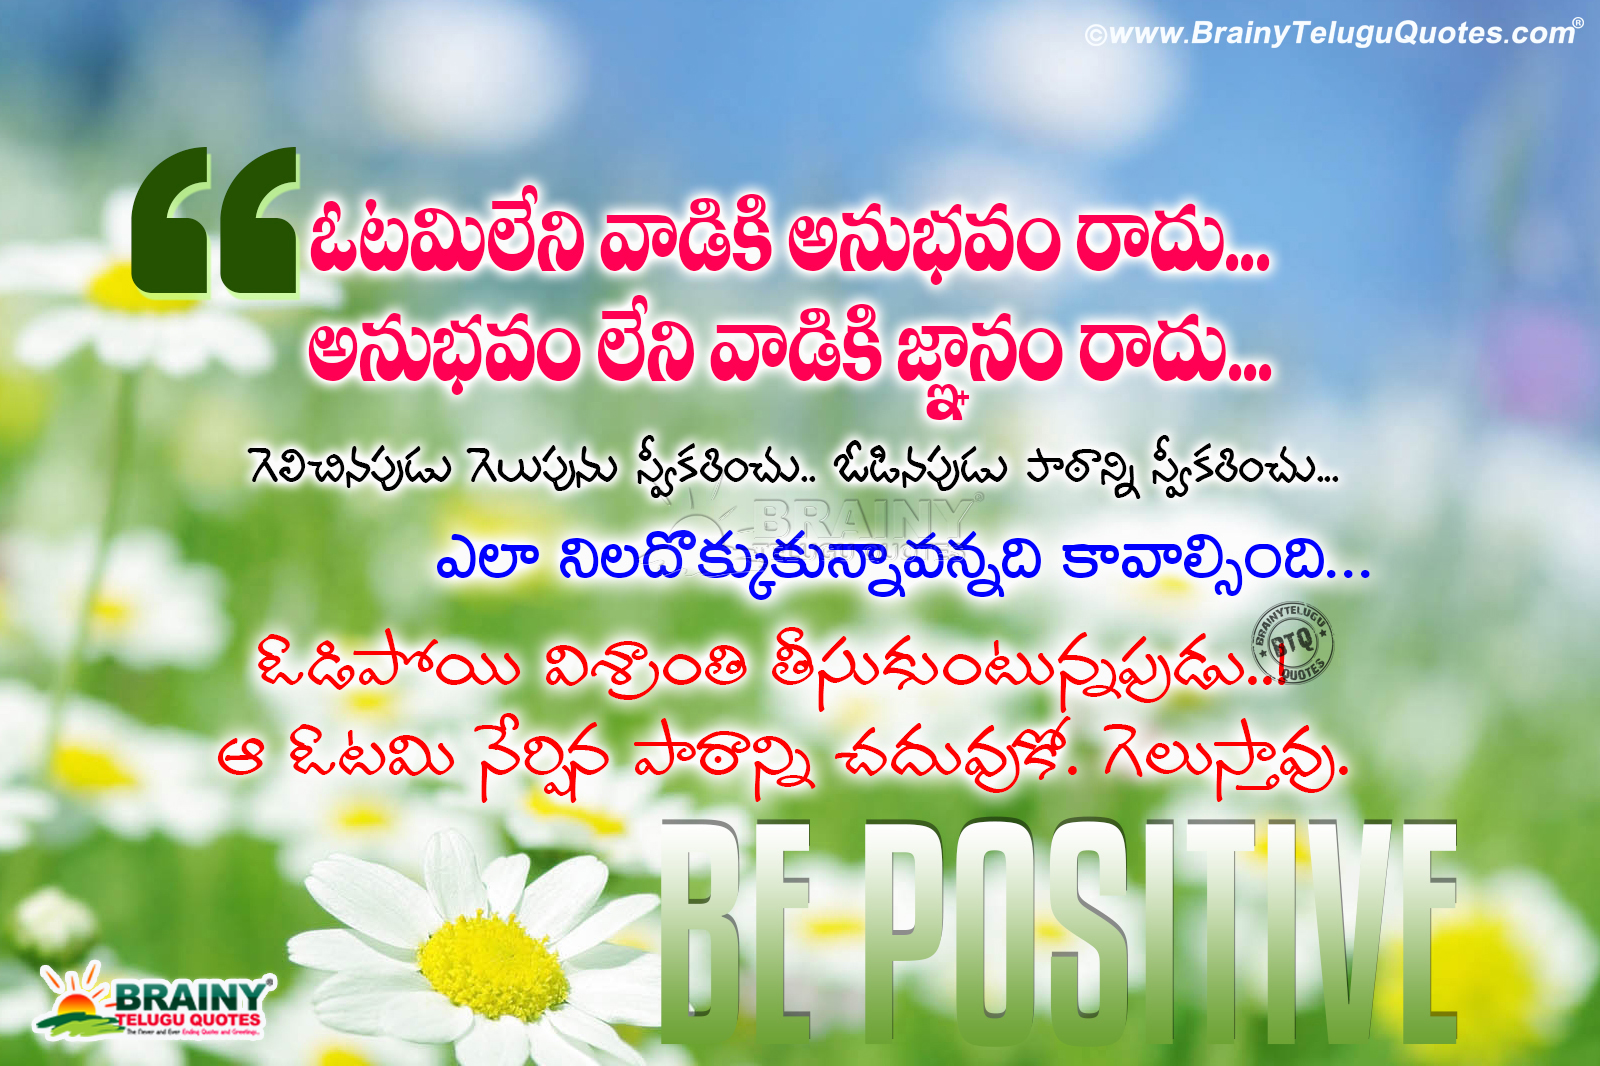 Success Sayings Best Inspirational messages Quotes in Telugu-Telugu ...